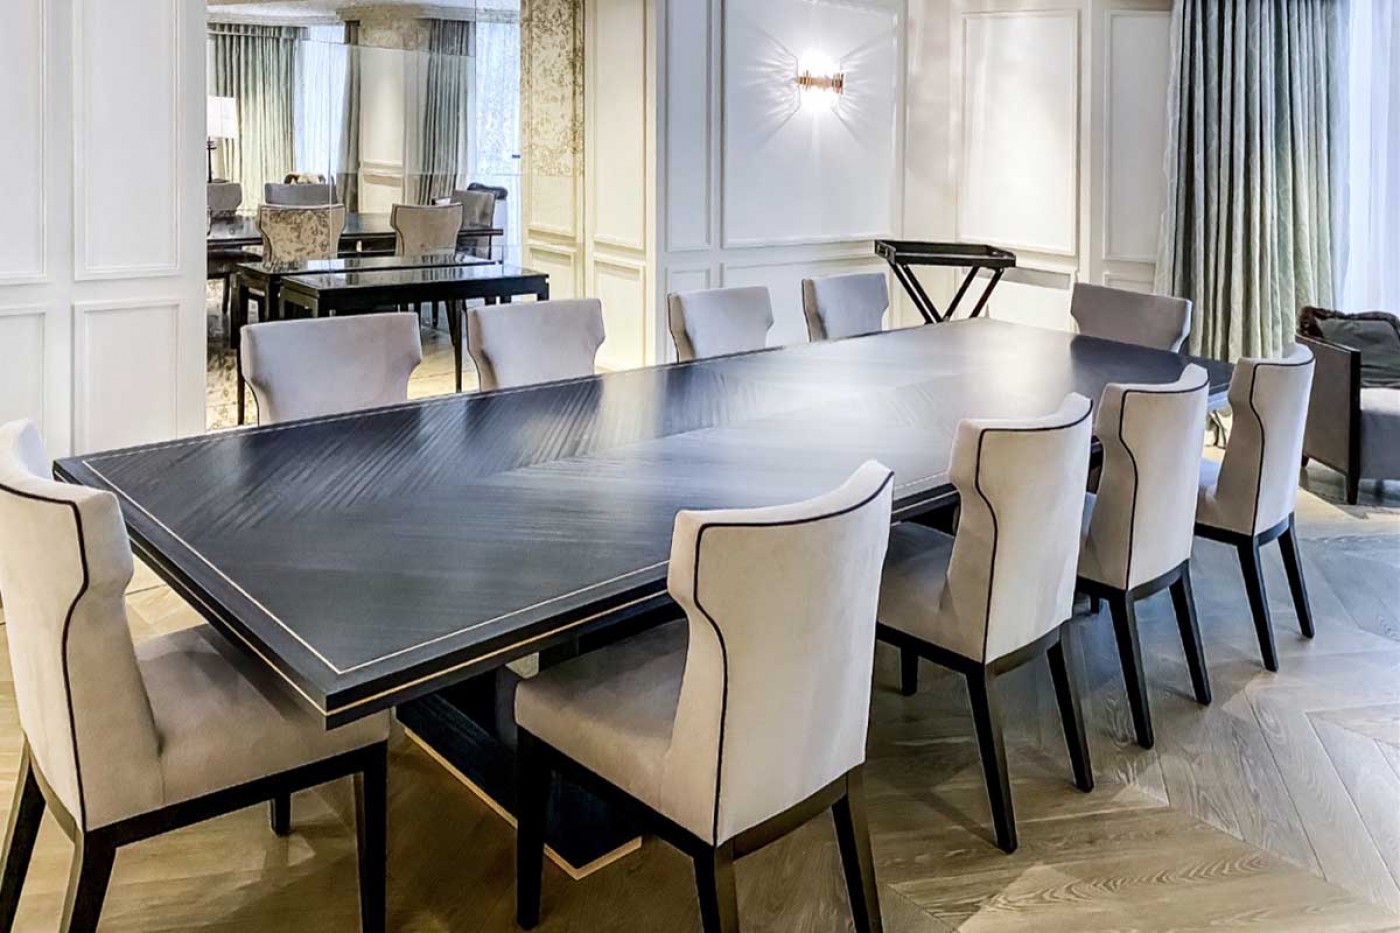 Sycamore & solid maple dining table | Knightsbridge